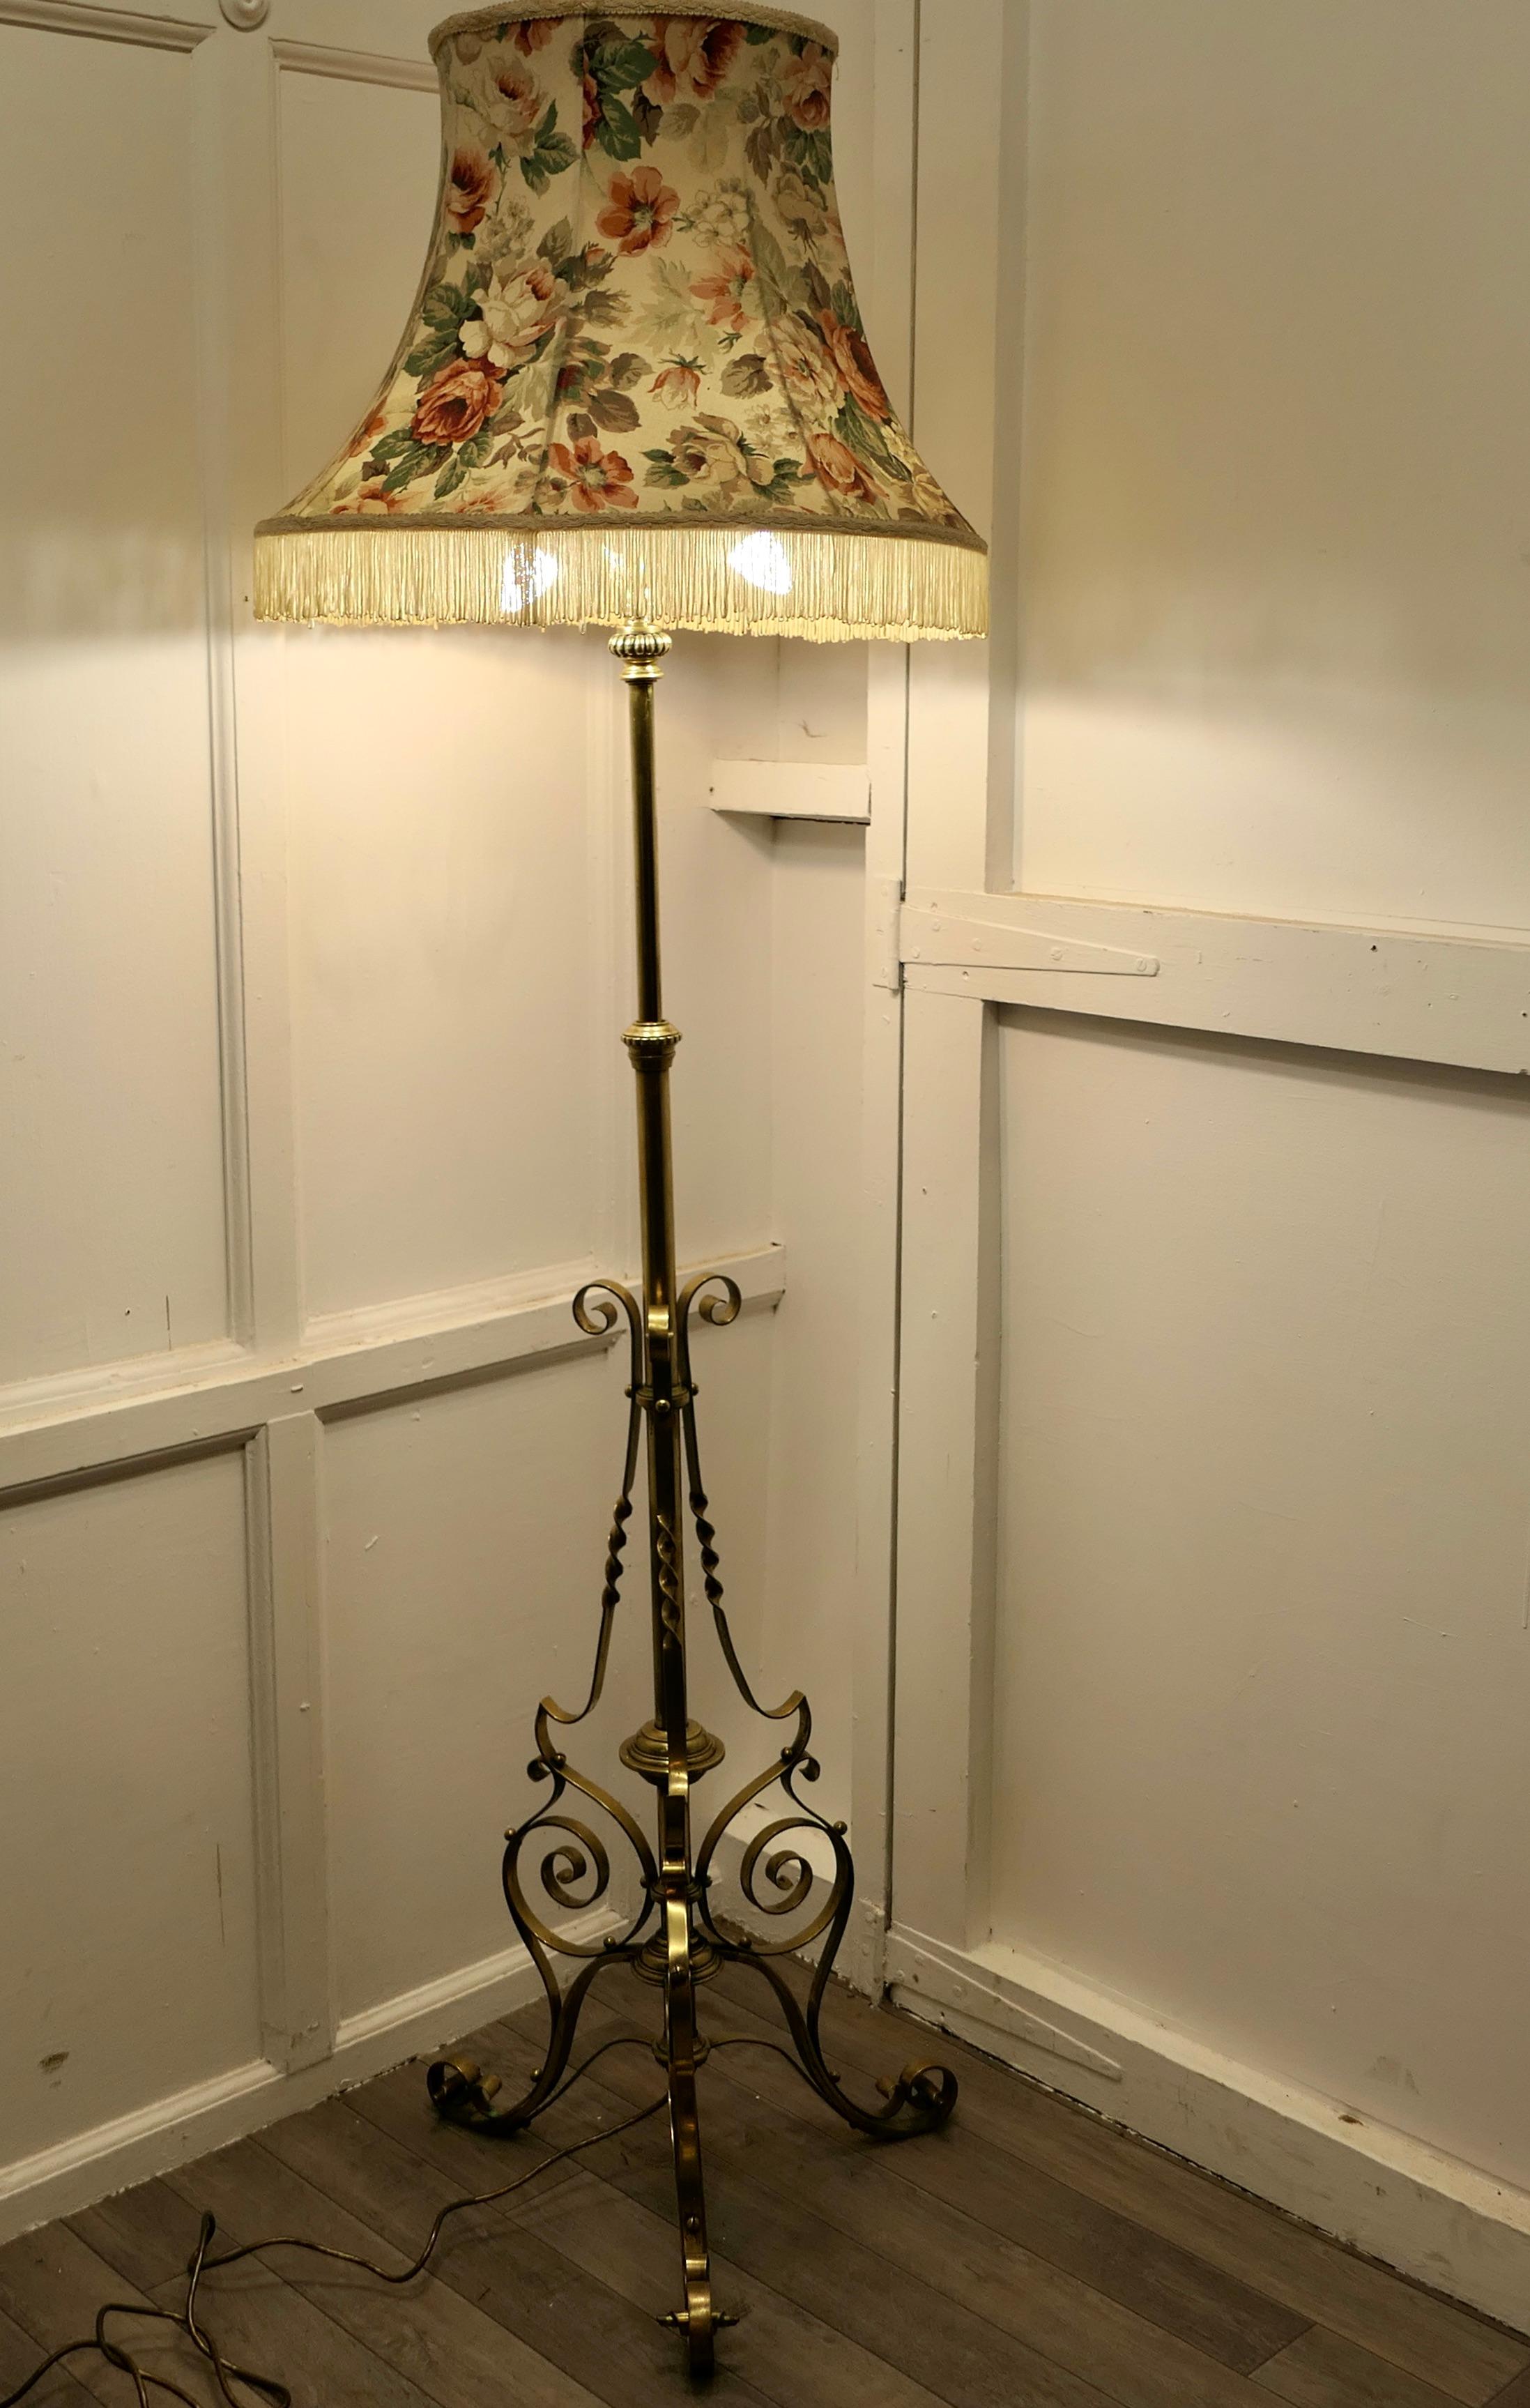 Brass adjustable arts and crafts floor lamp

This is a very attractive piece, the lamp has a telescopic action and a decorative wrought brass base also the upright column can be extended to raise the height of the lamp
I have shown the lamp with